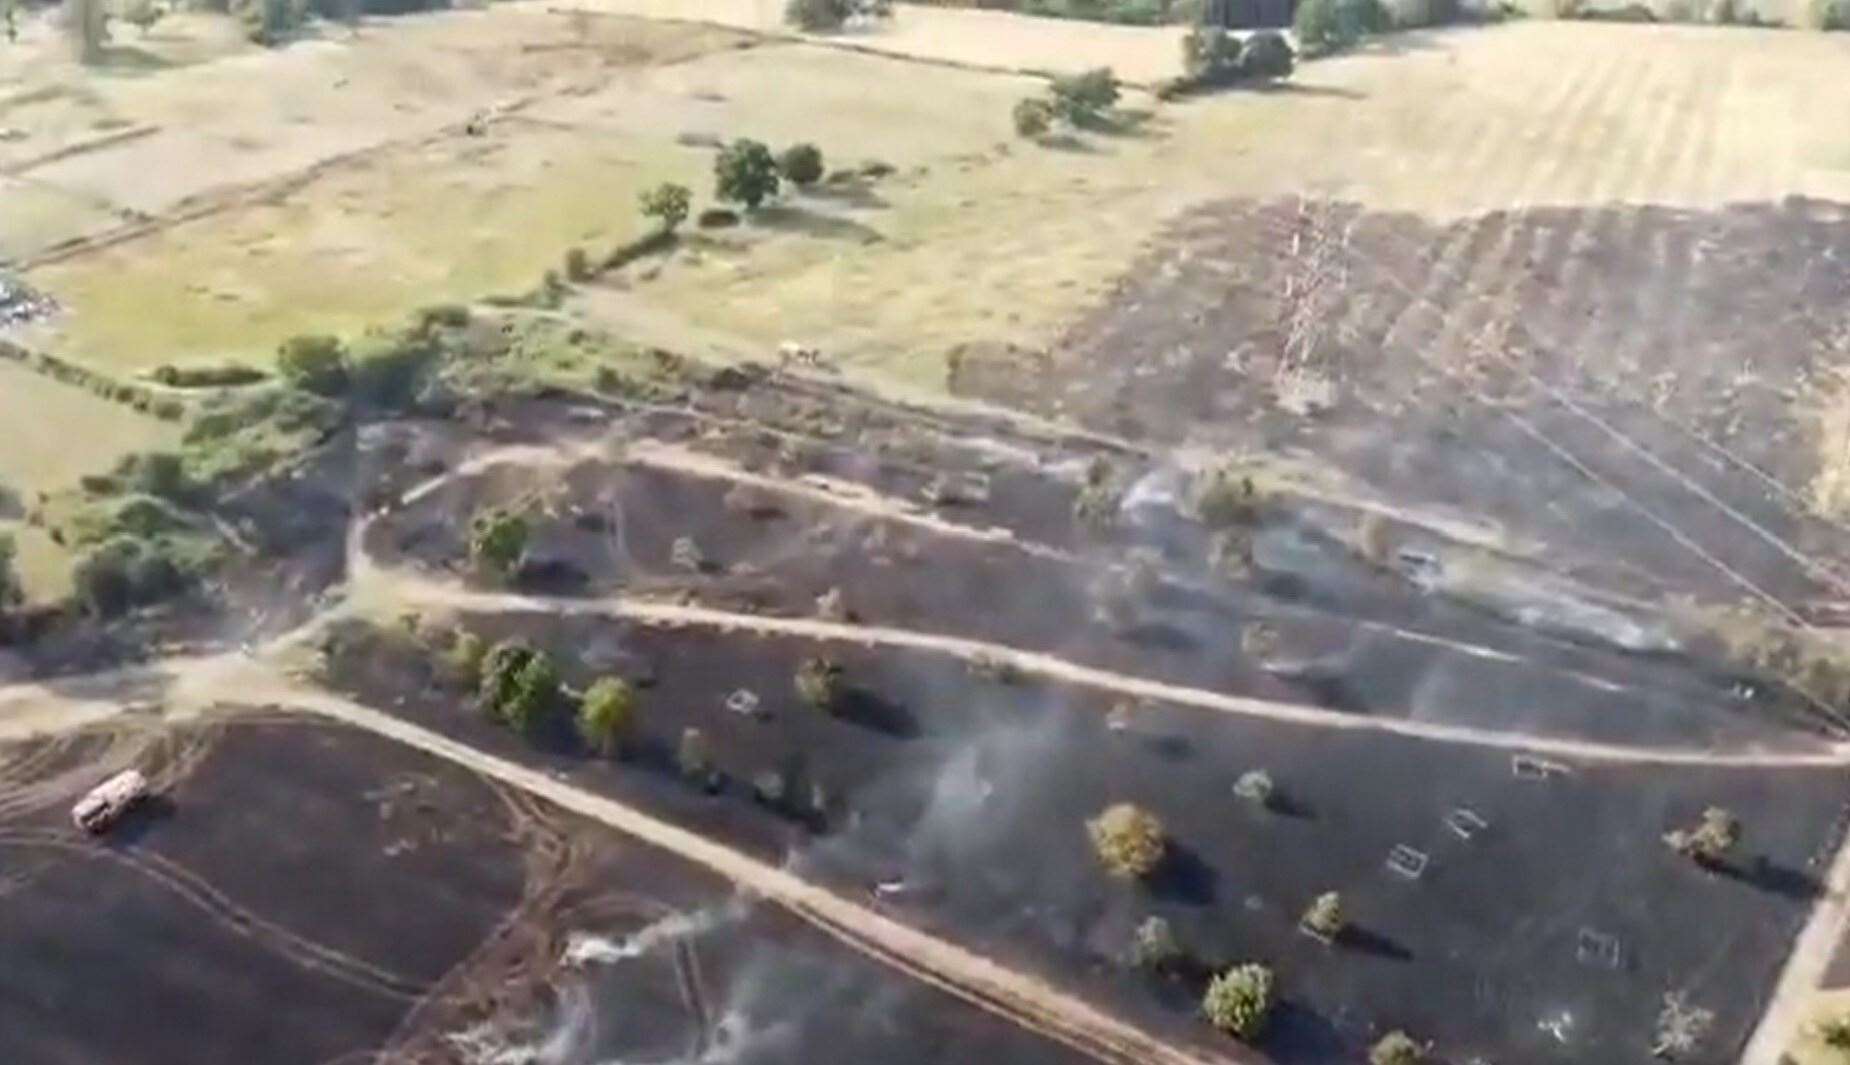 Firefighters urged people not to light fires in the countryside, as drone footage showed a devastating blaze in Hertfordshire (Hertfordshire Fire and Rescue Service/PA)